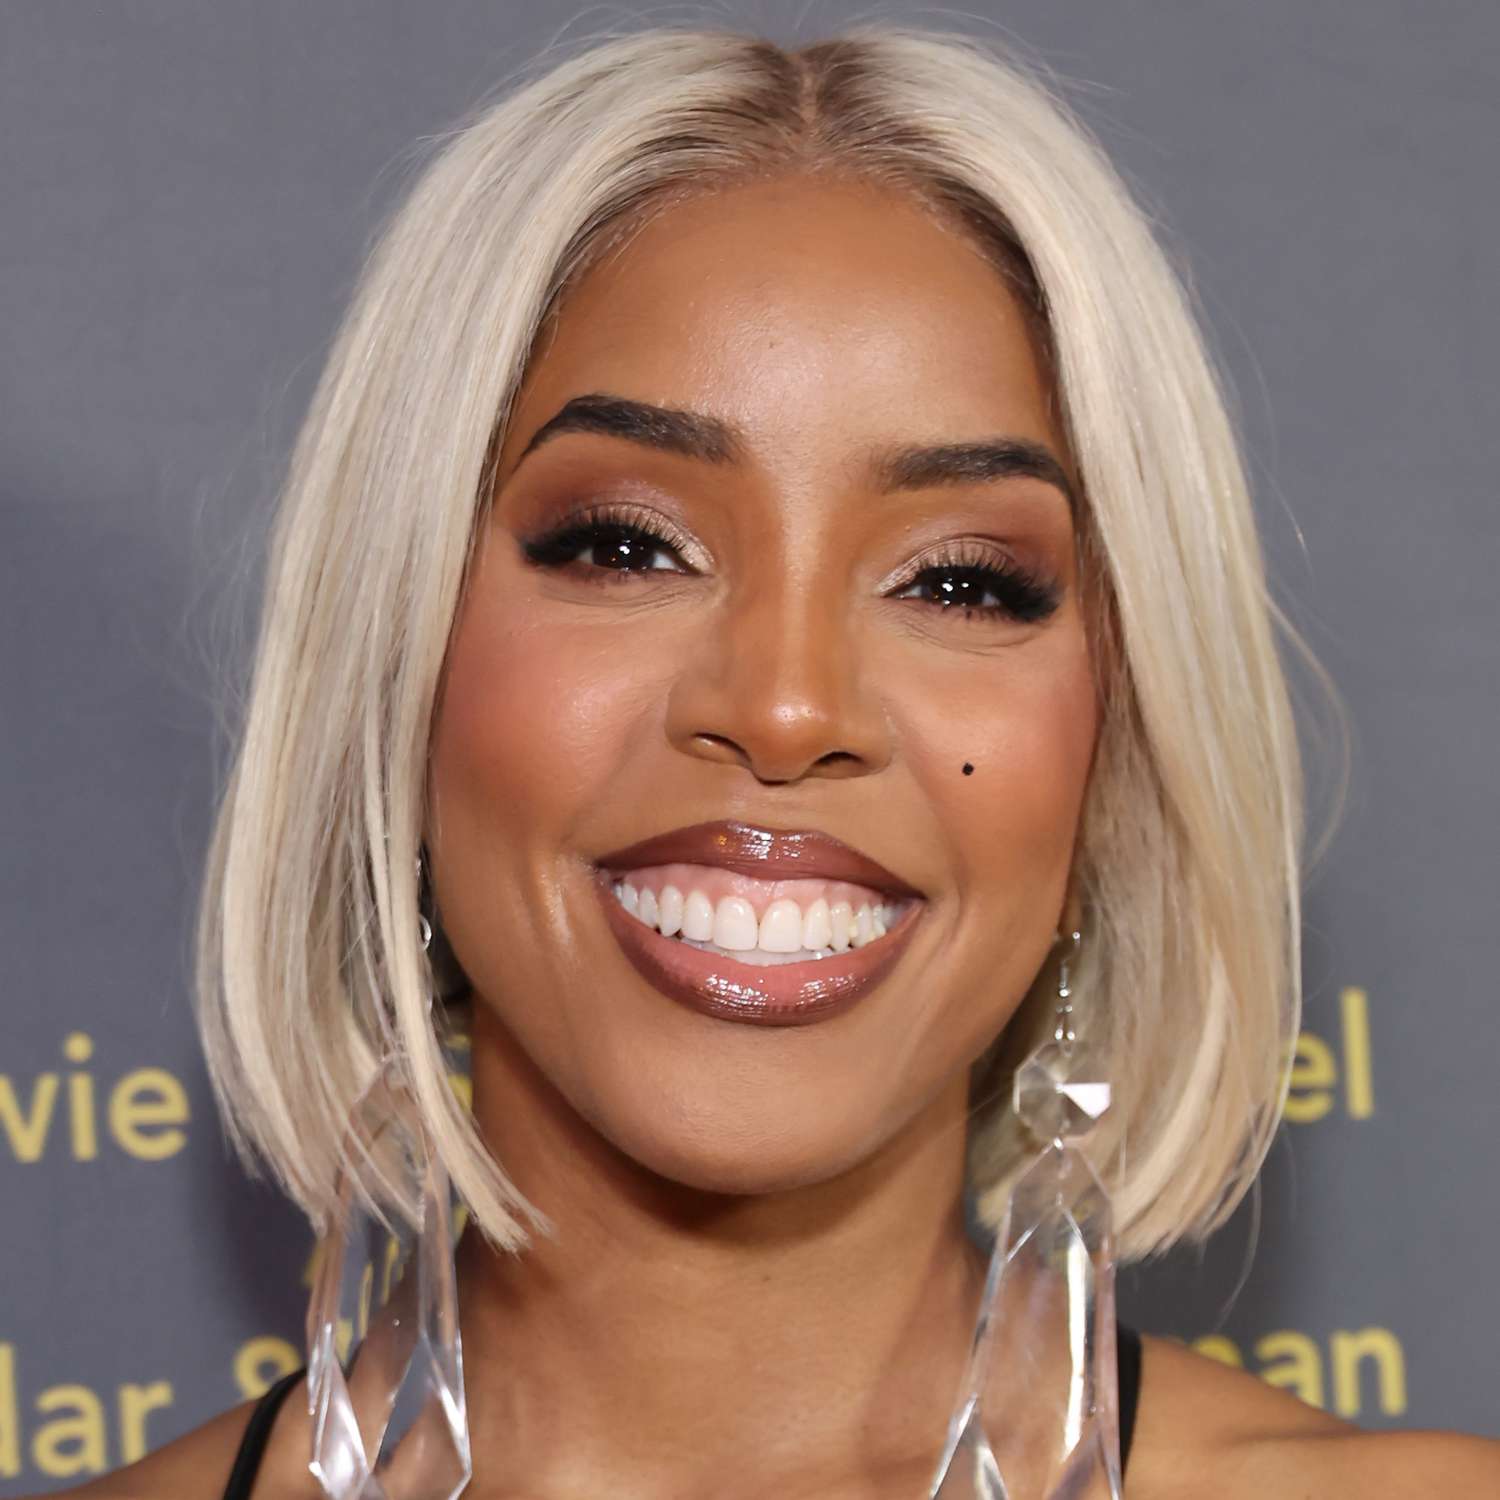 Kelly Rowland attends a Gala with a straight, icy blonde bob and a center-part 